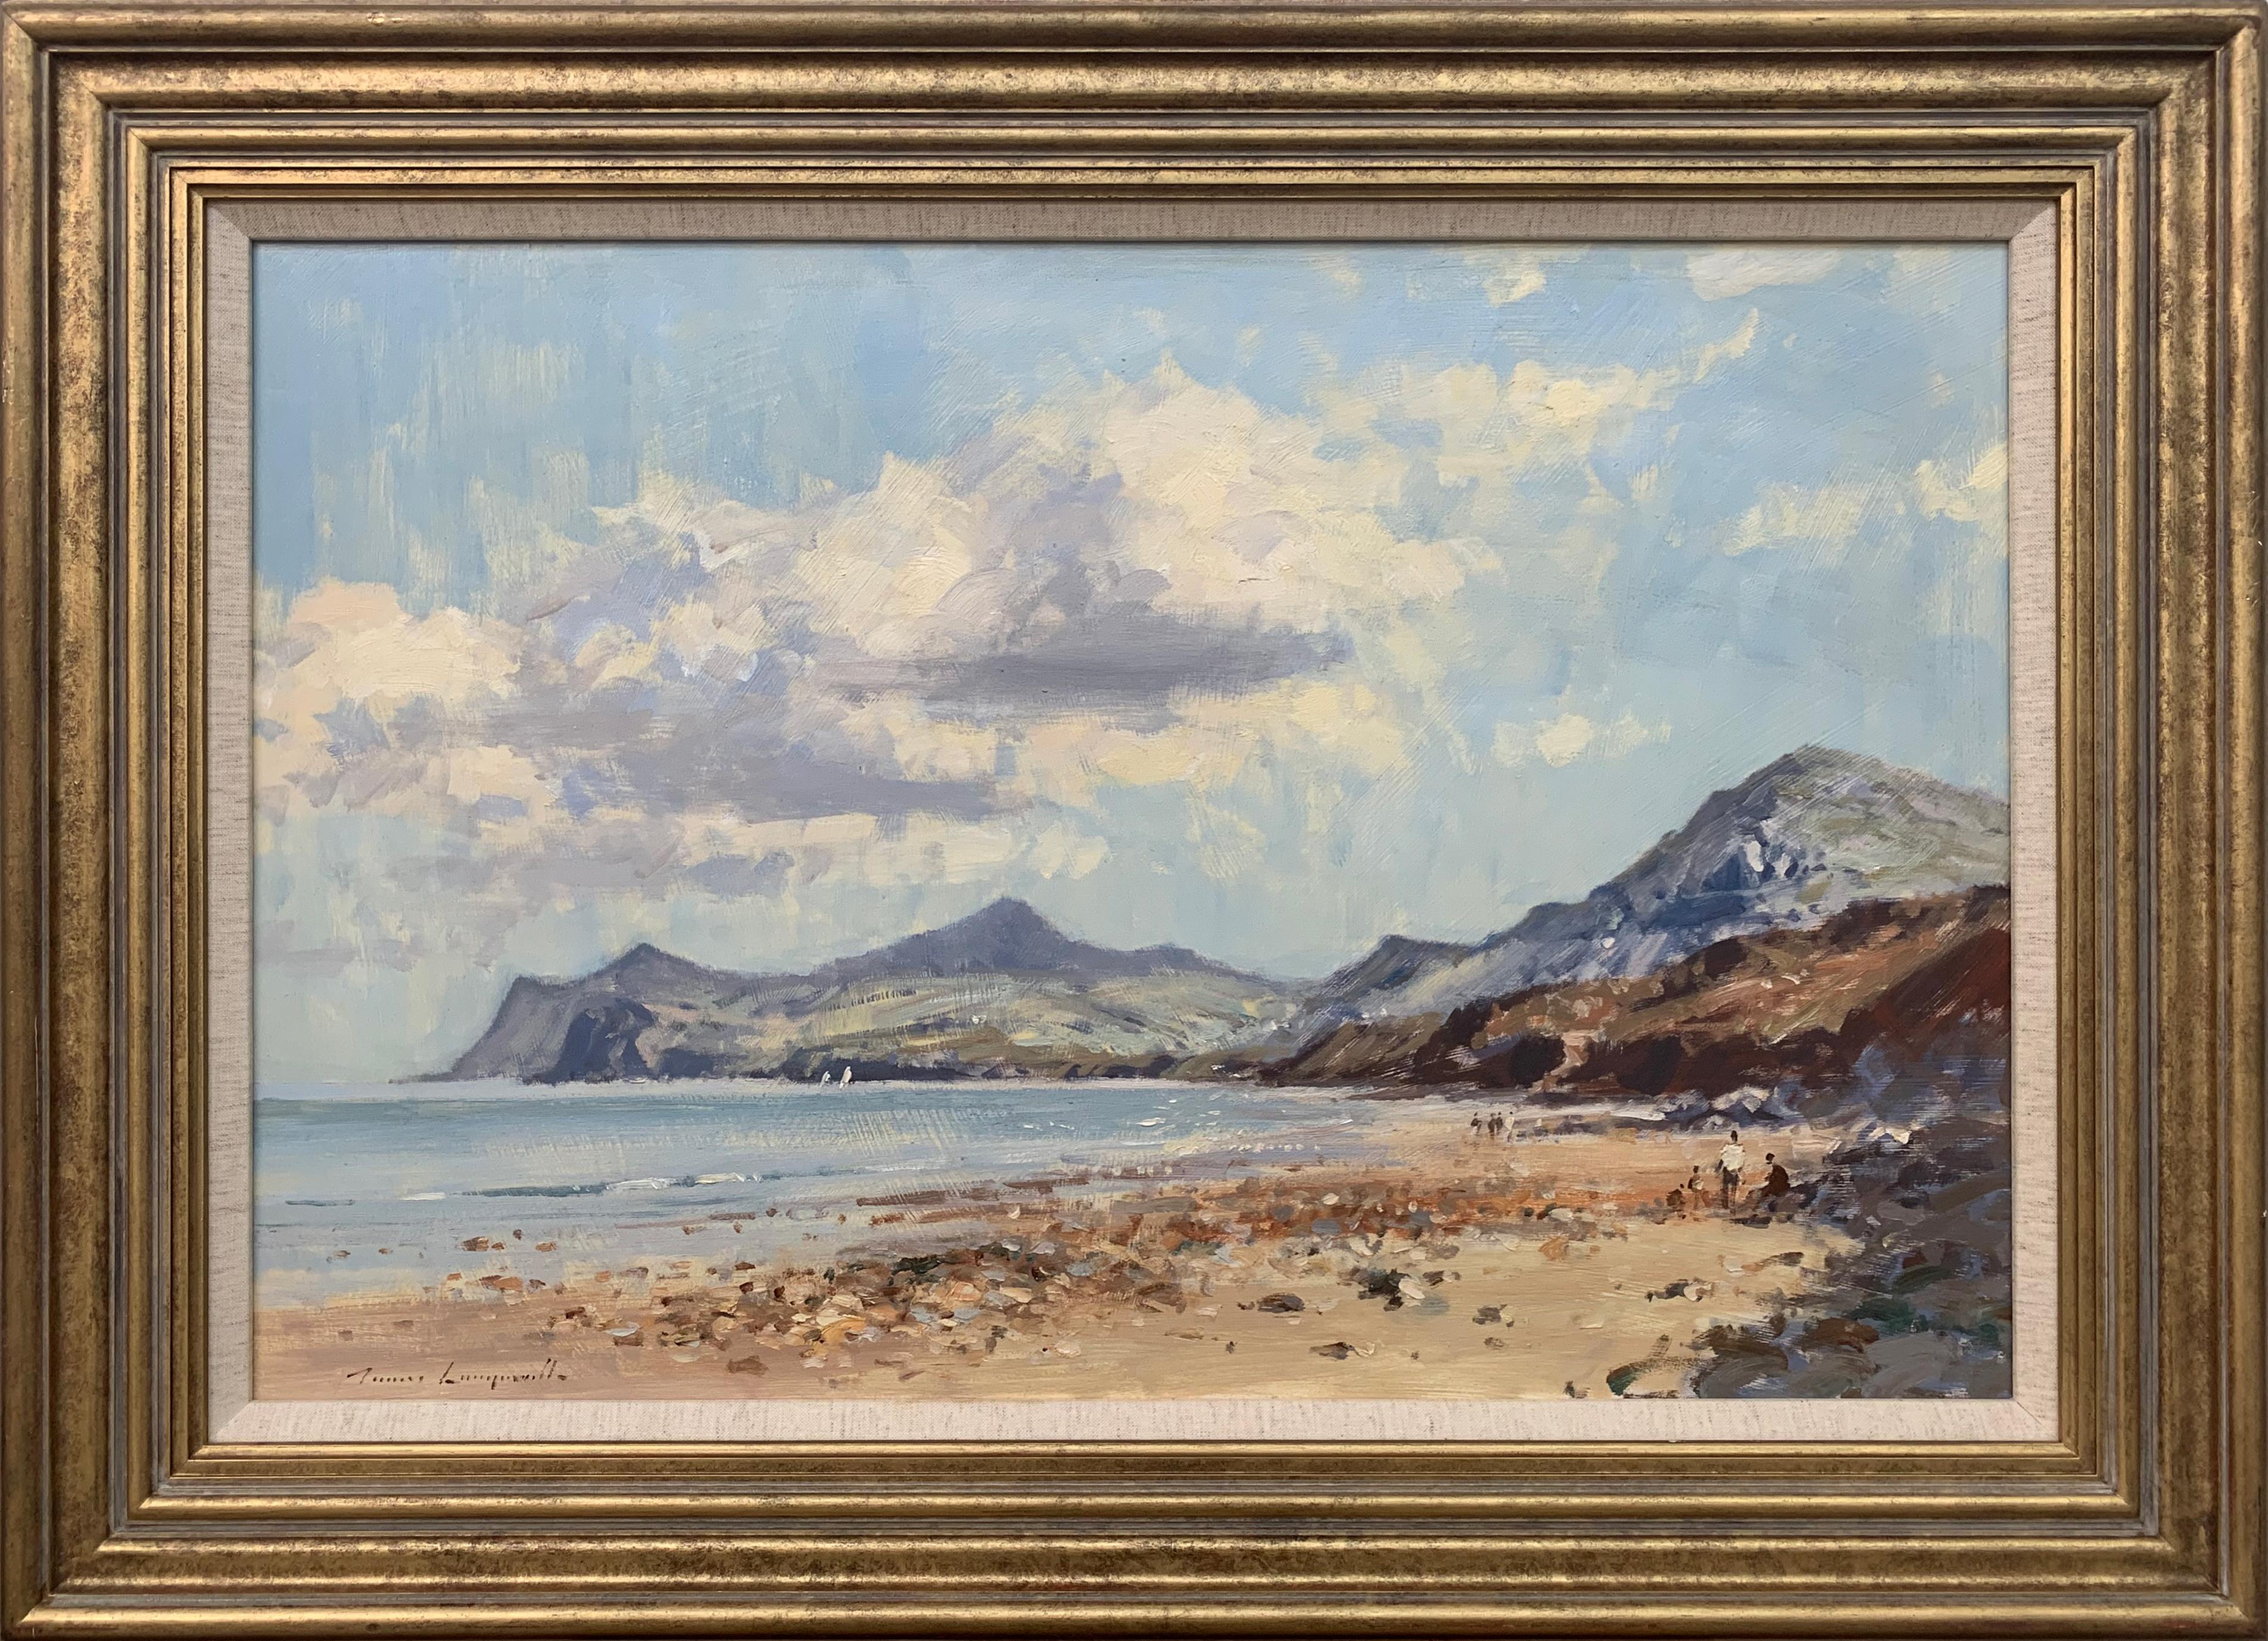 James Longueville PS, RBSA Landscape Painting - Landscape Seascape Painting of Coast from Nefyn in North Wales by British Artist